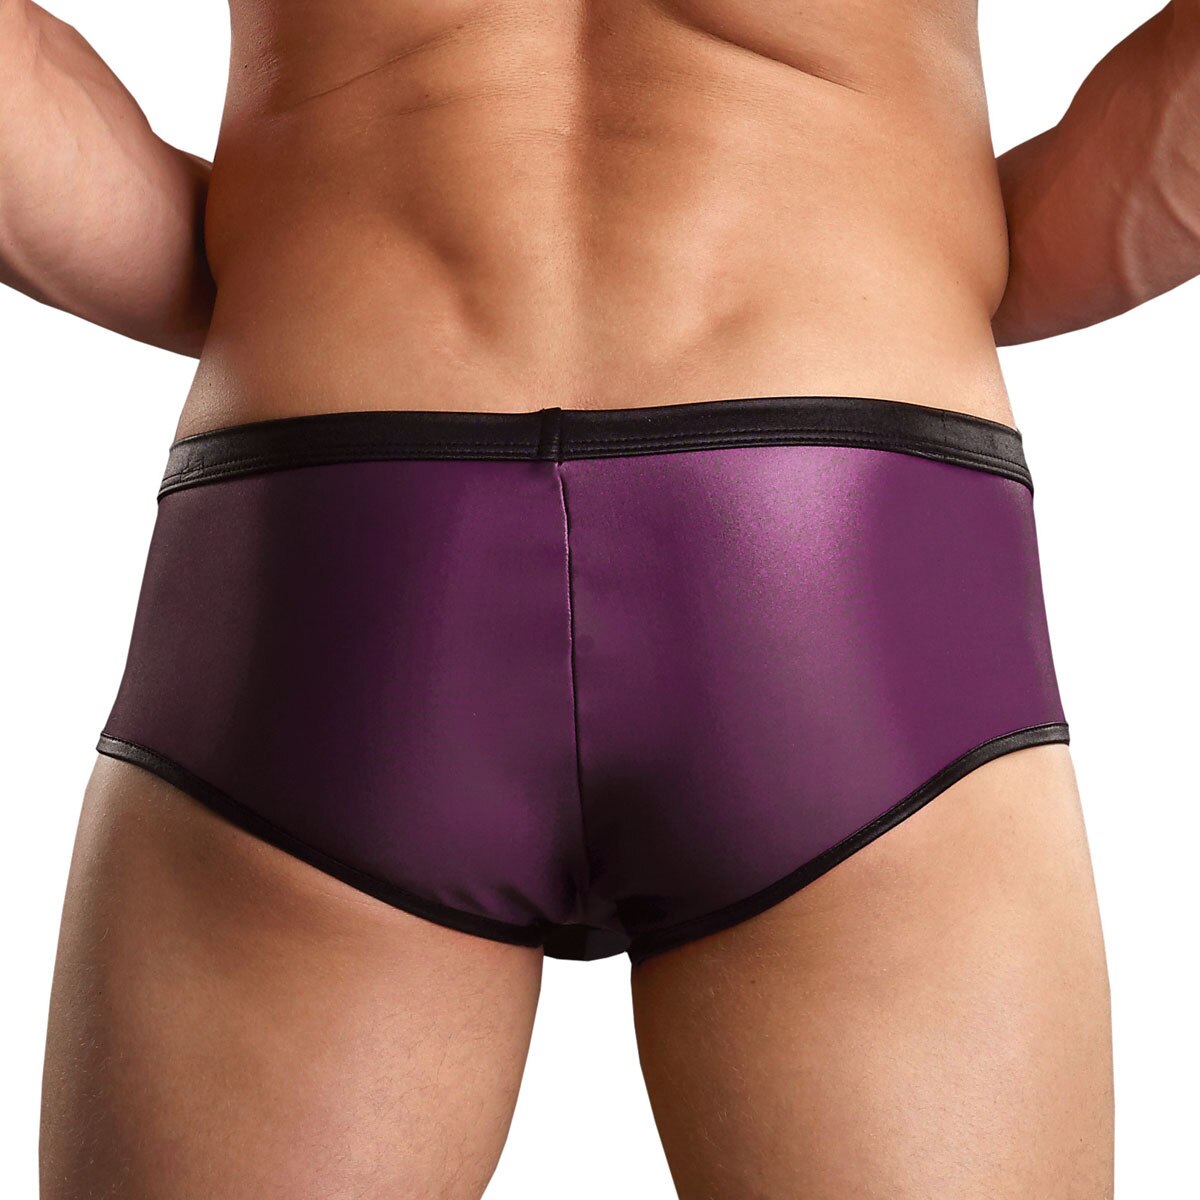 Mens Boxer Shorts with Zipper Front Black & Wine